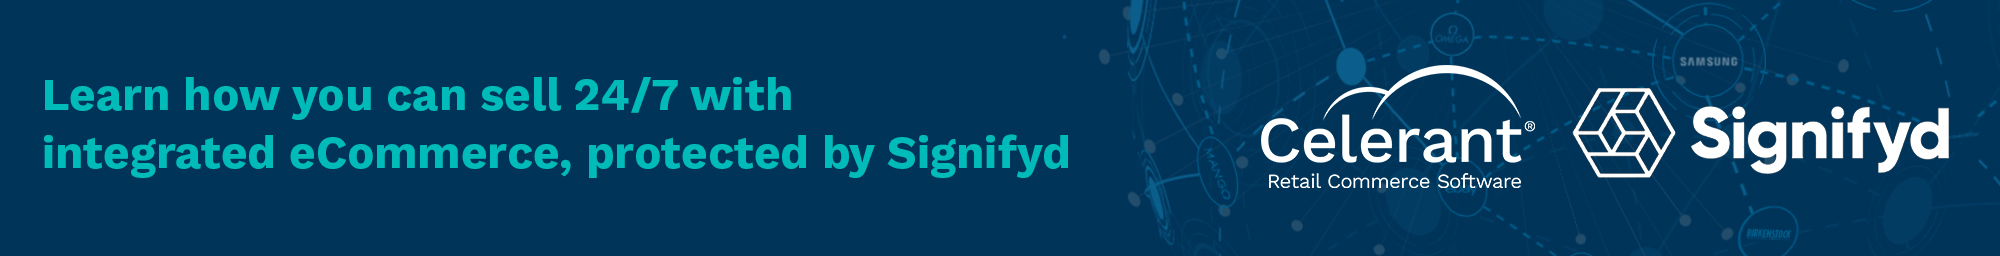 Celerant eCommerce and Signifyd